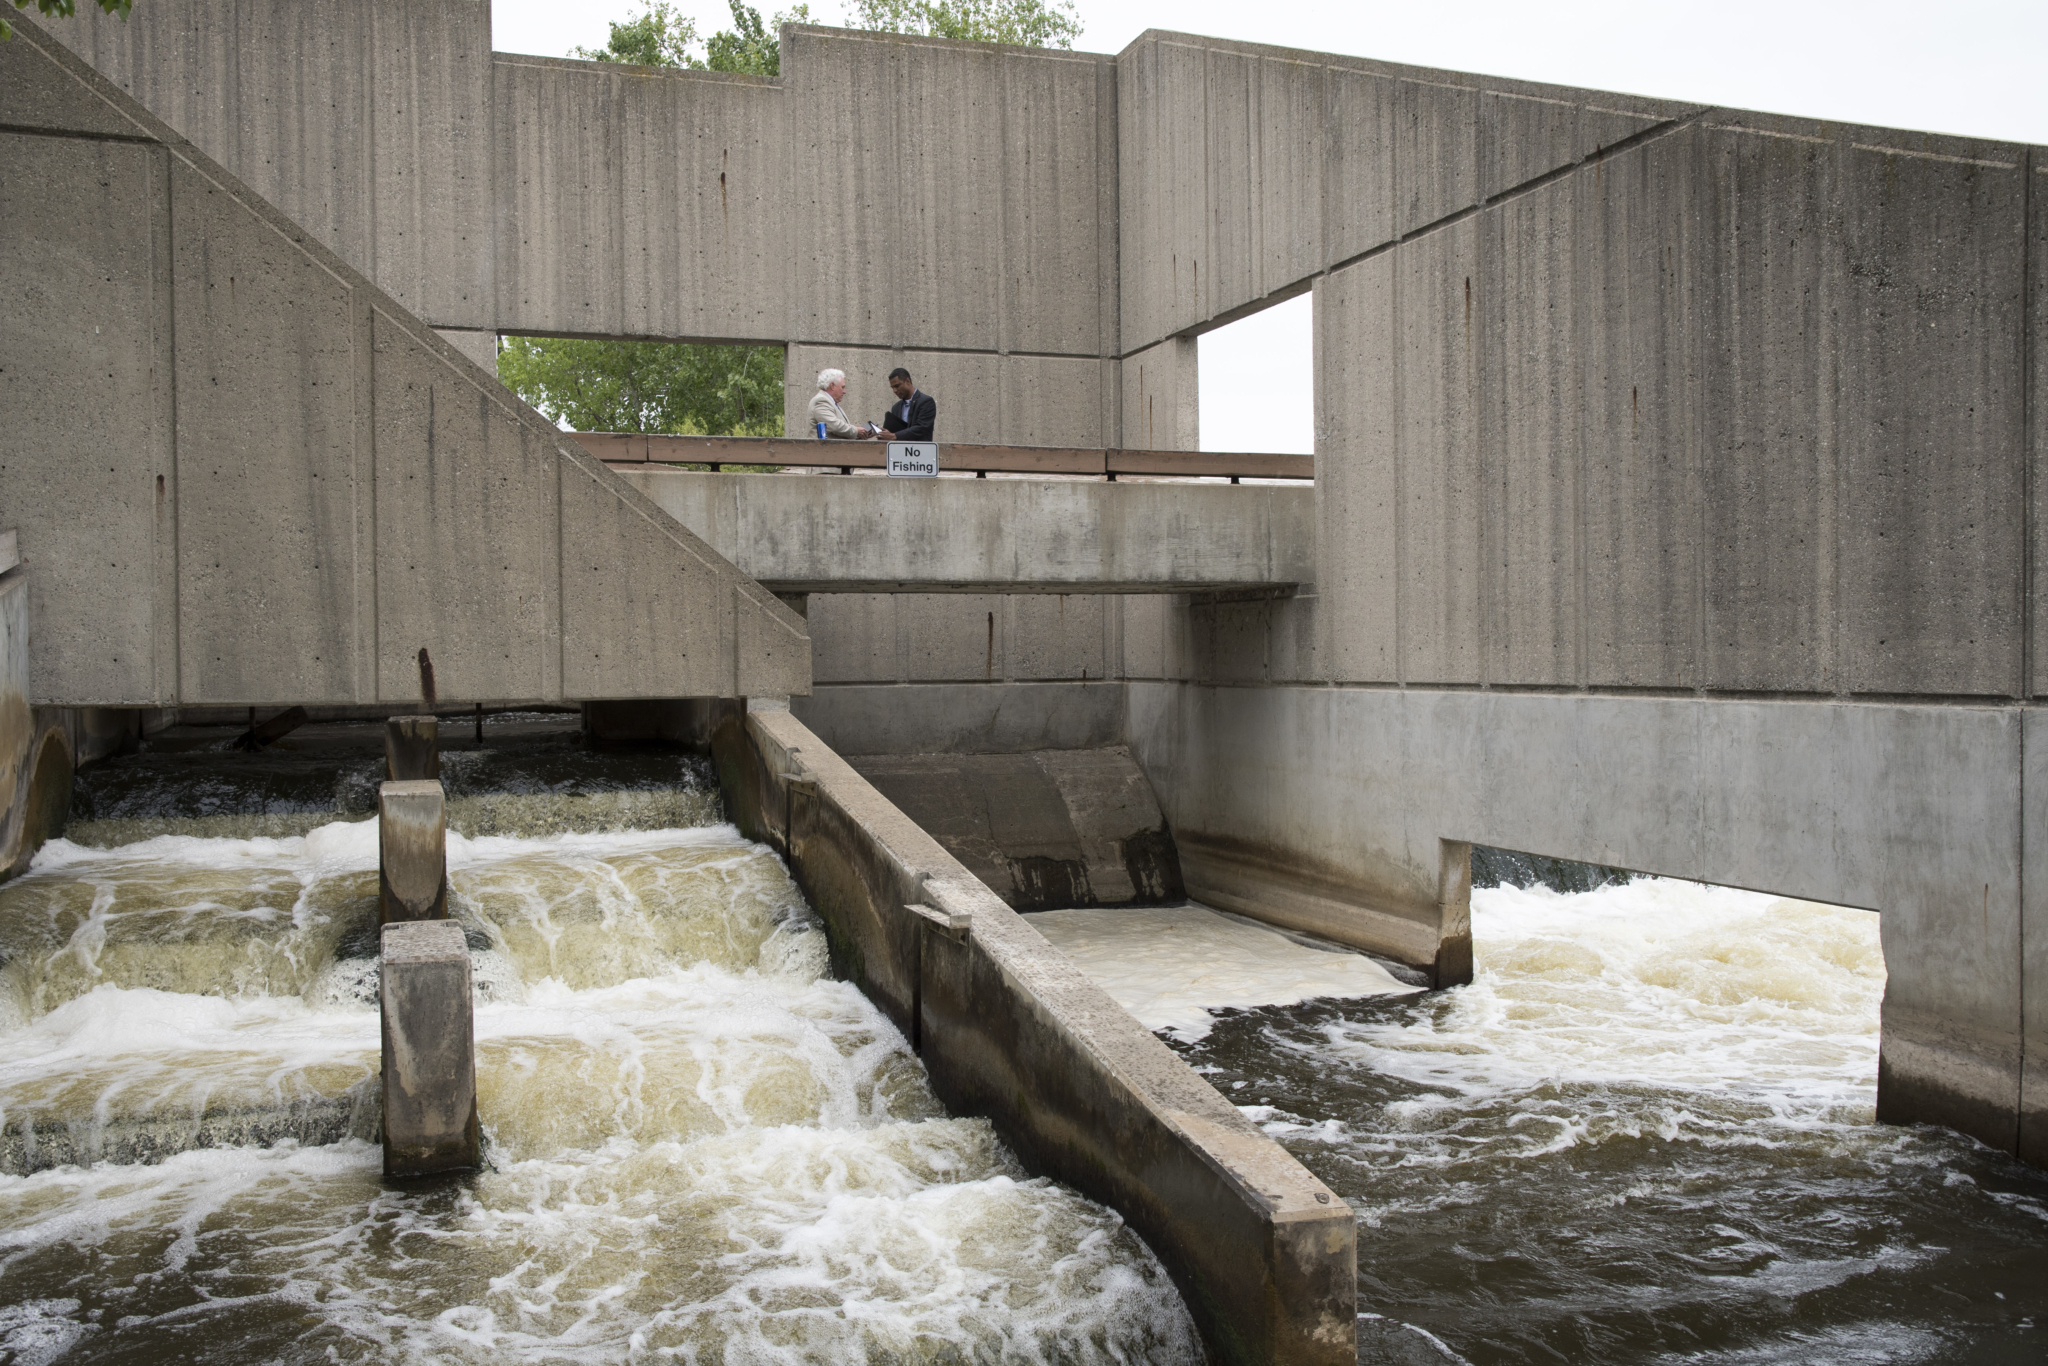 Michael Lunn and Tom Almonte, of the city of Grand Rapids, Michigan, featured in the September issue, discuss a project at the Grand River Dam. The city recently completed an extensive sewer separation project to combat CSOs, finishing ahead of the 2019 deadline originally given for the project.